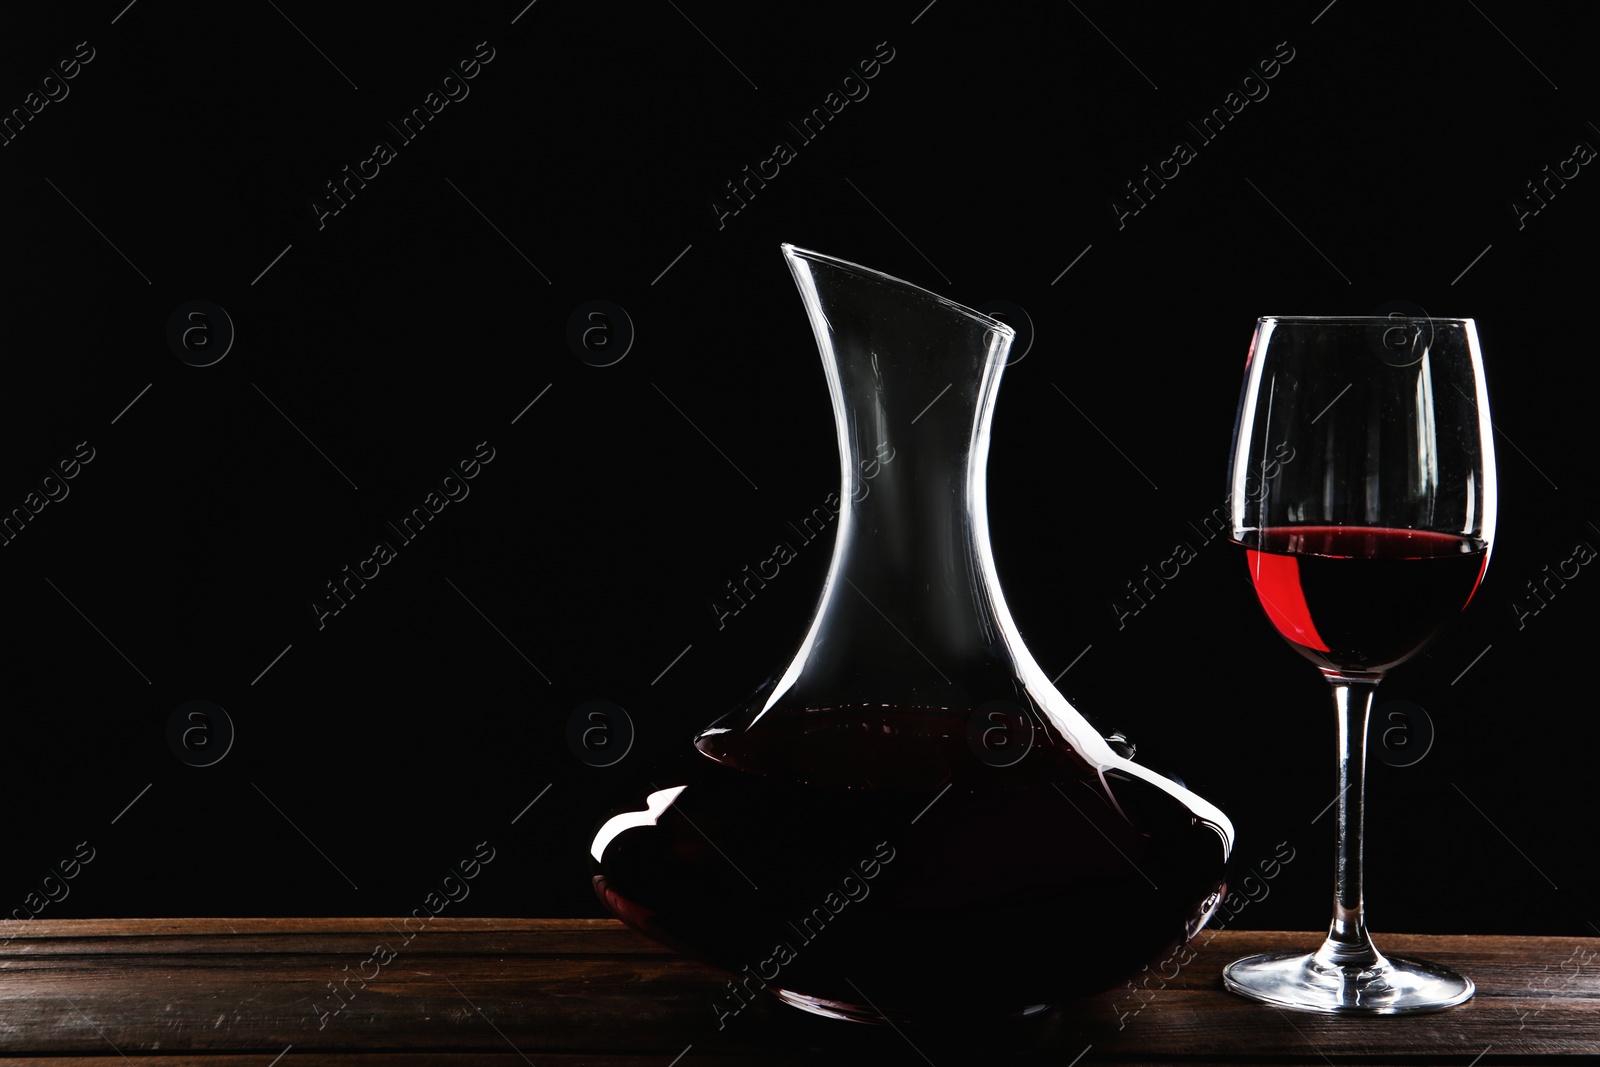 Photo of Elegant decanter and glass with red wine on table against dark background